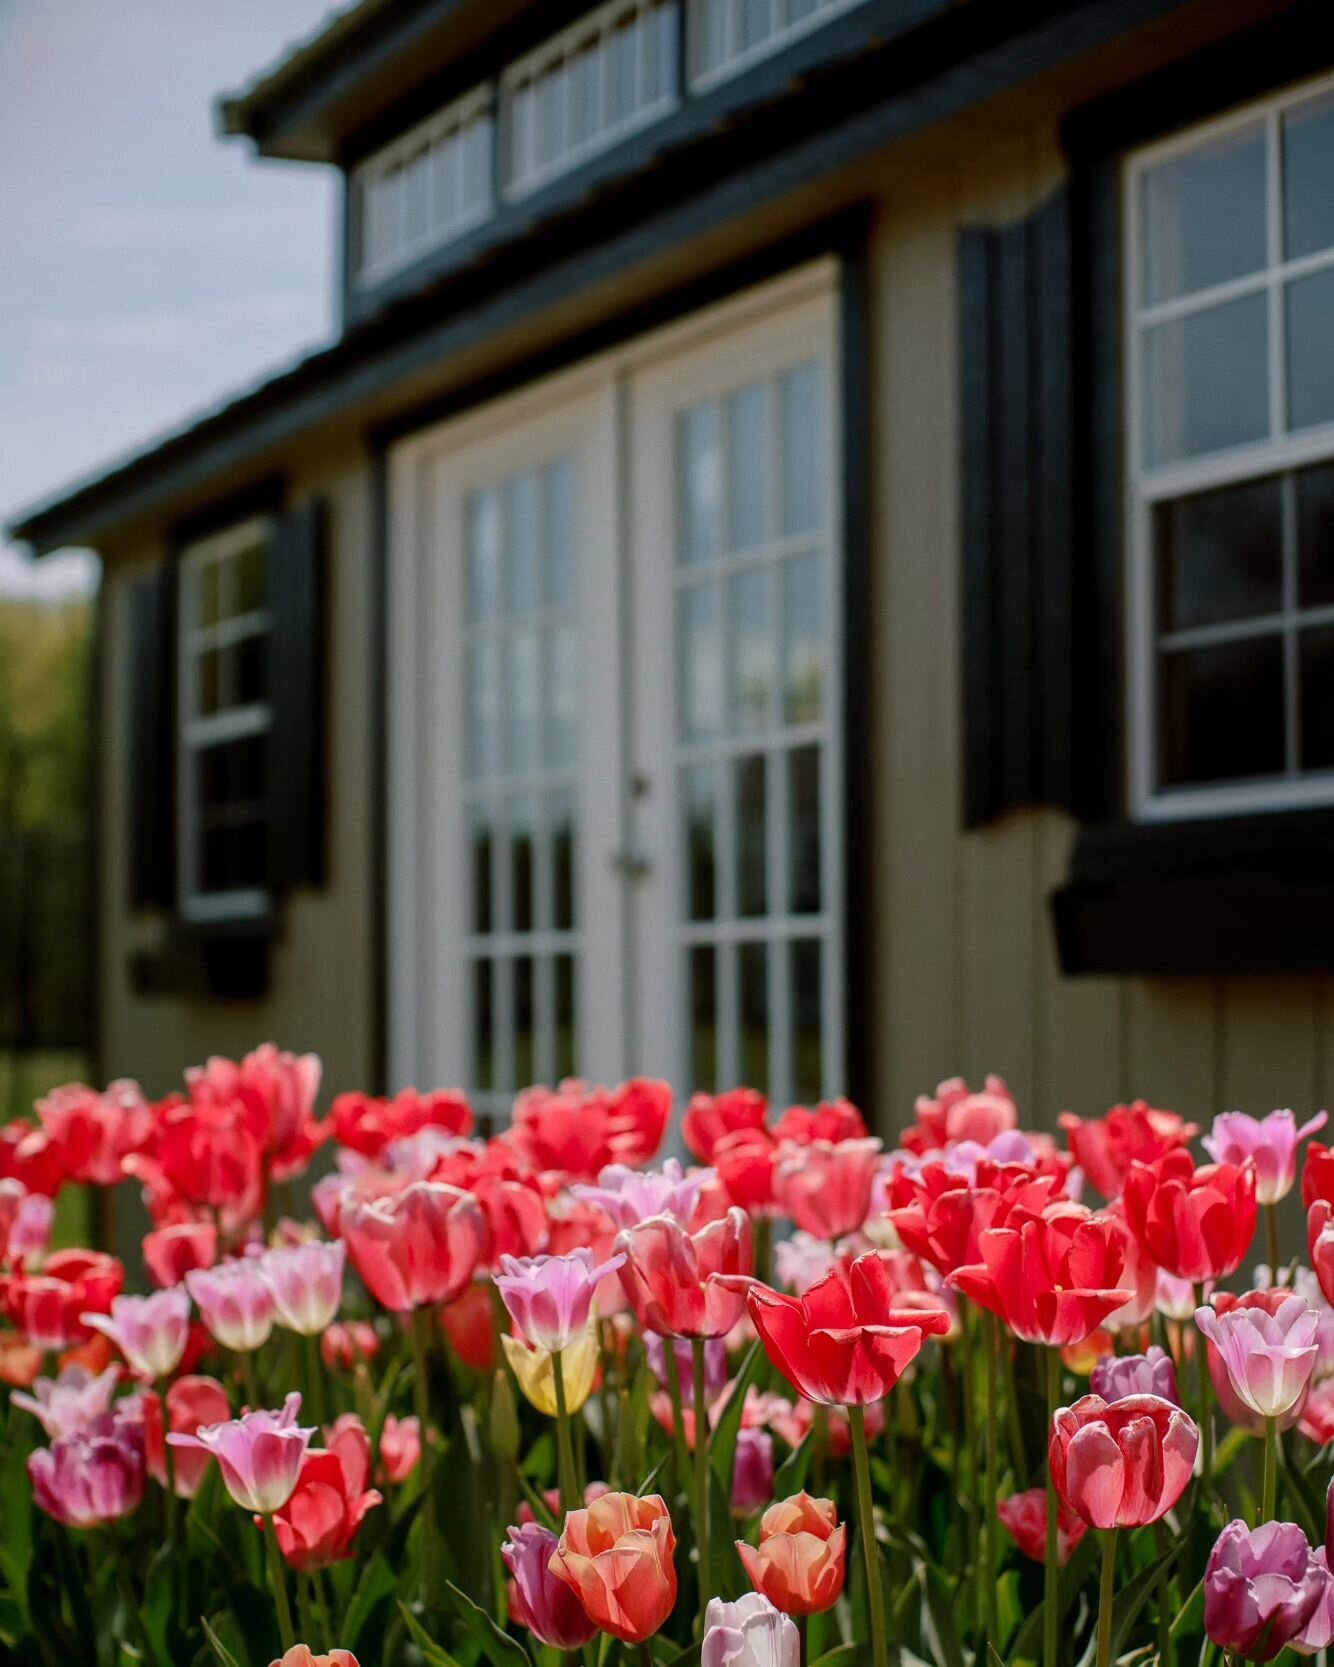 Tulips, hyacinths, and daffodils, oh my! Imagine a garden filled with the most enchanting blooms, situated behind the quaint charm of The Pickle Factory. 🌷Our secret garden at The Millhaven is silently beckoning the arrival of spring, preparing a vi